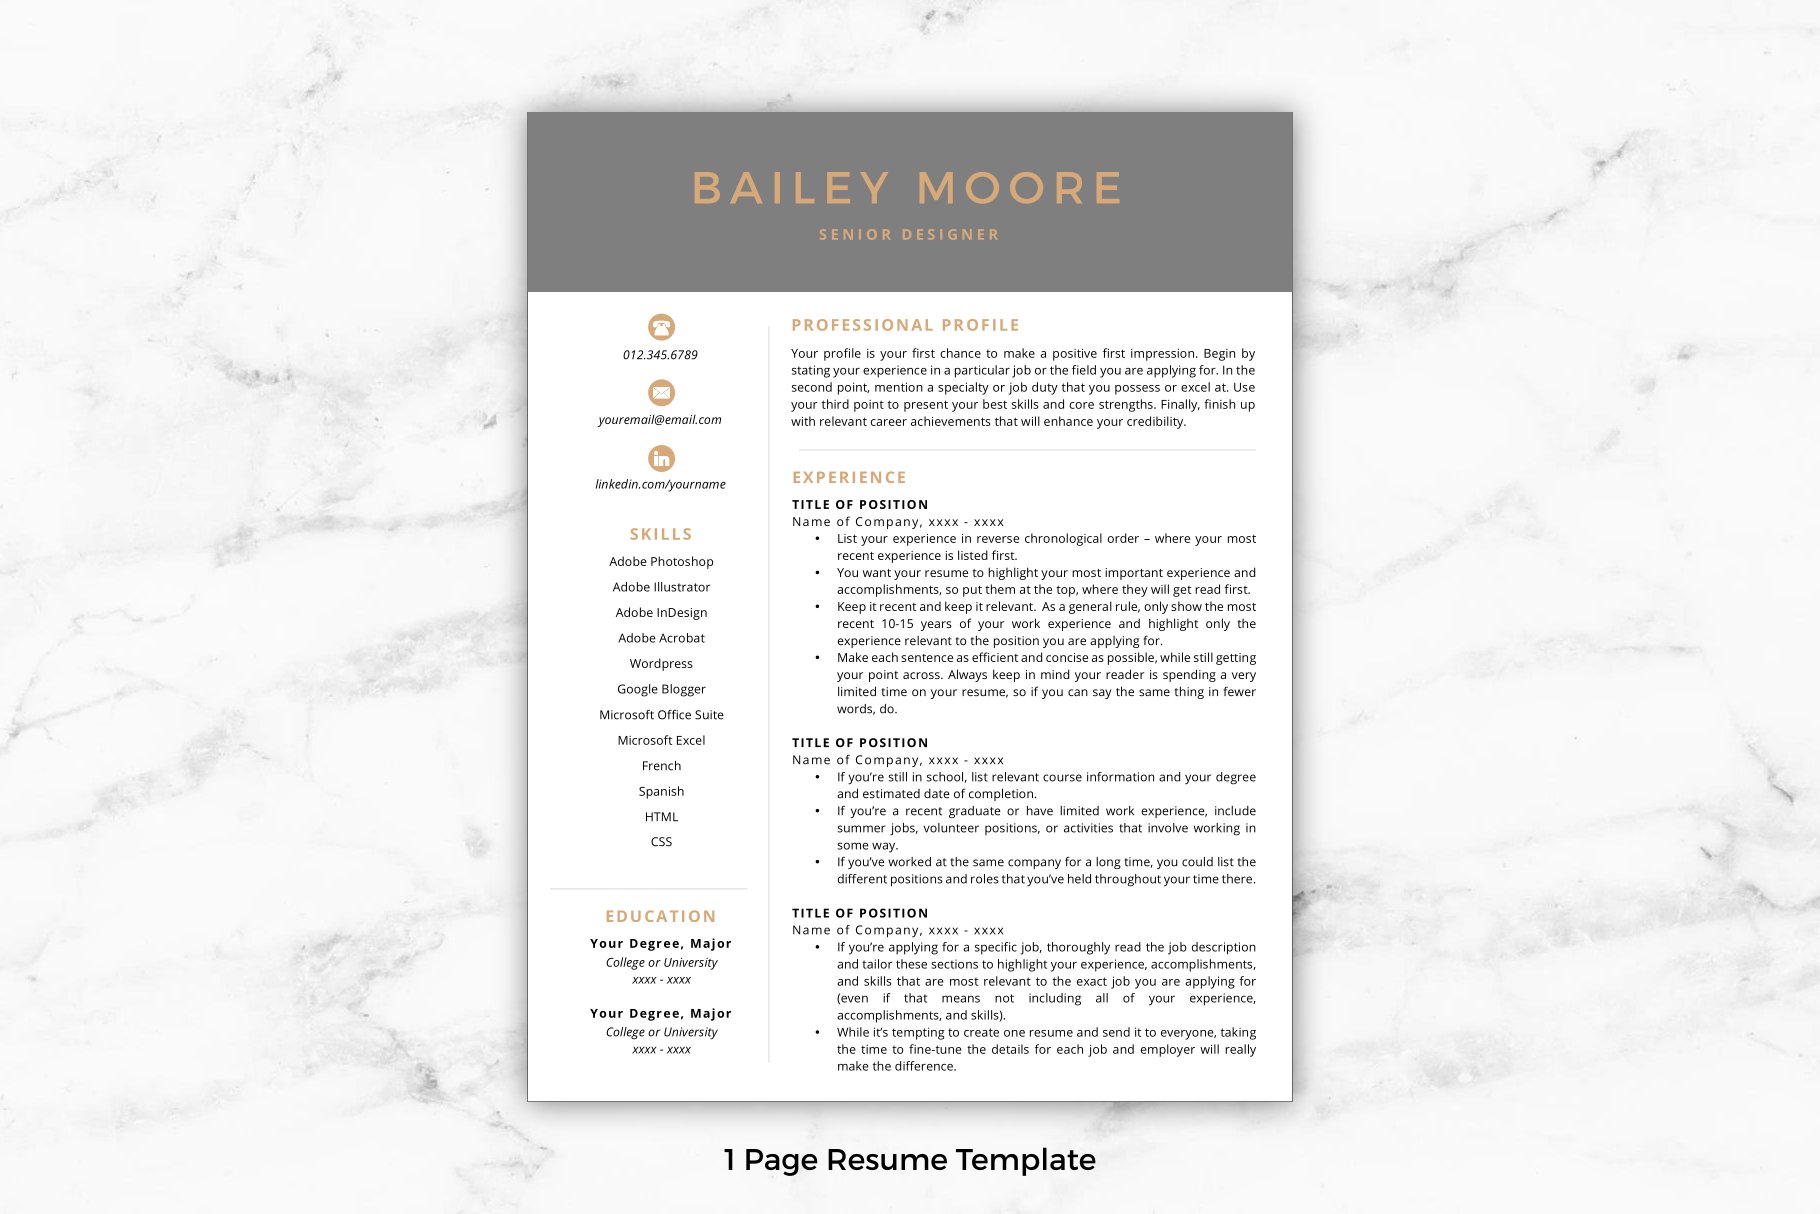 CV Template/Resume - Bailey preview image.